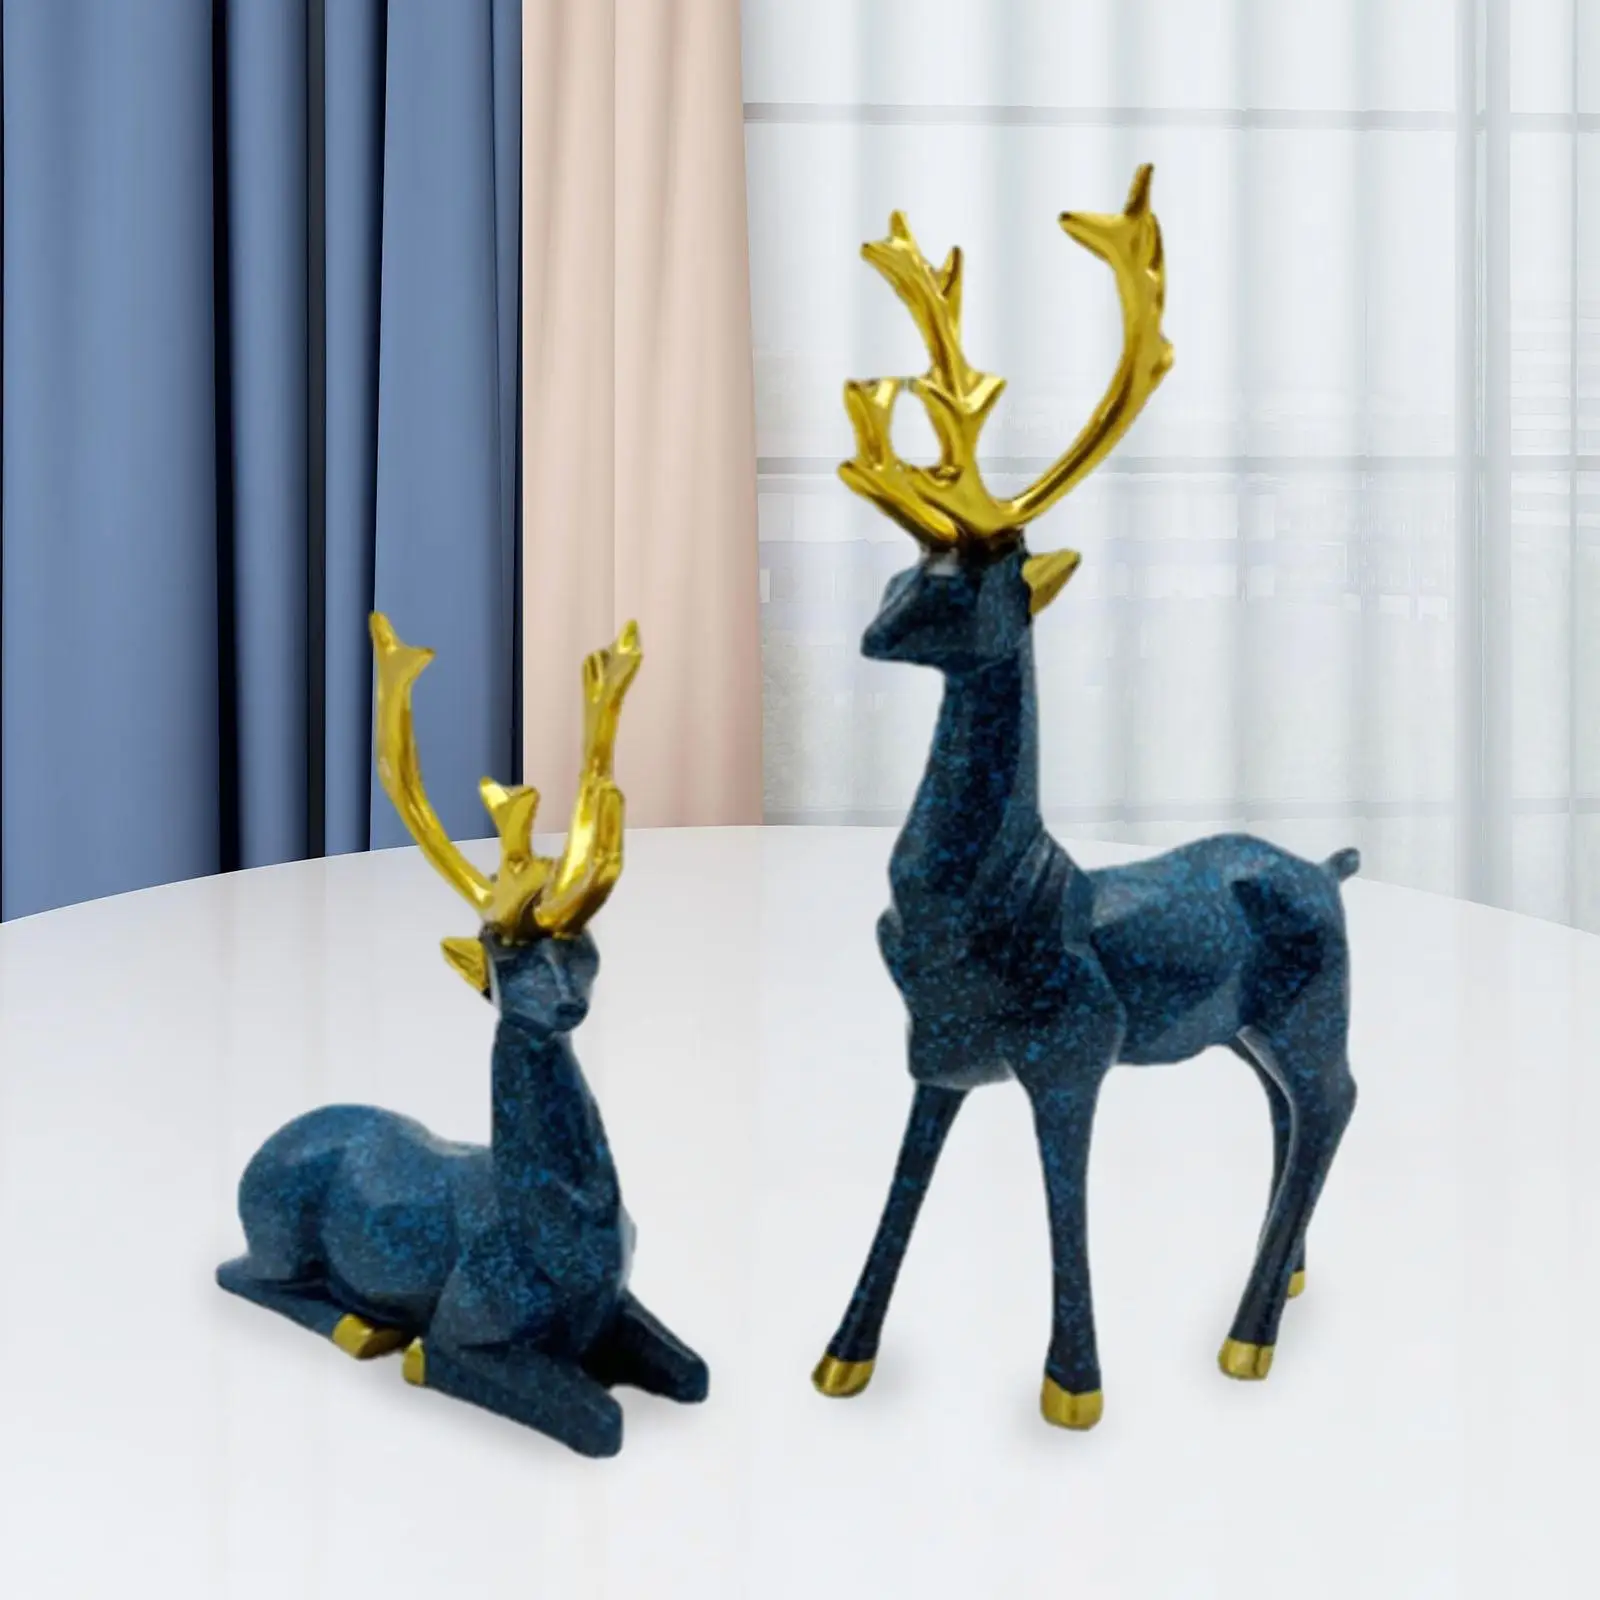 Deer Statue Decoration Animal Statue Crafts Art European Style Ornament Forest Sitting Standing Deer Statues for Living Room